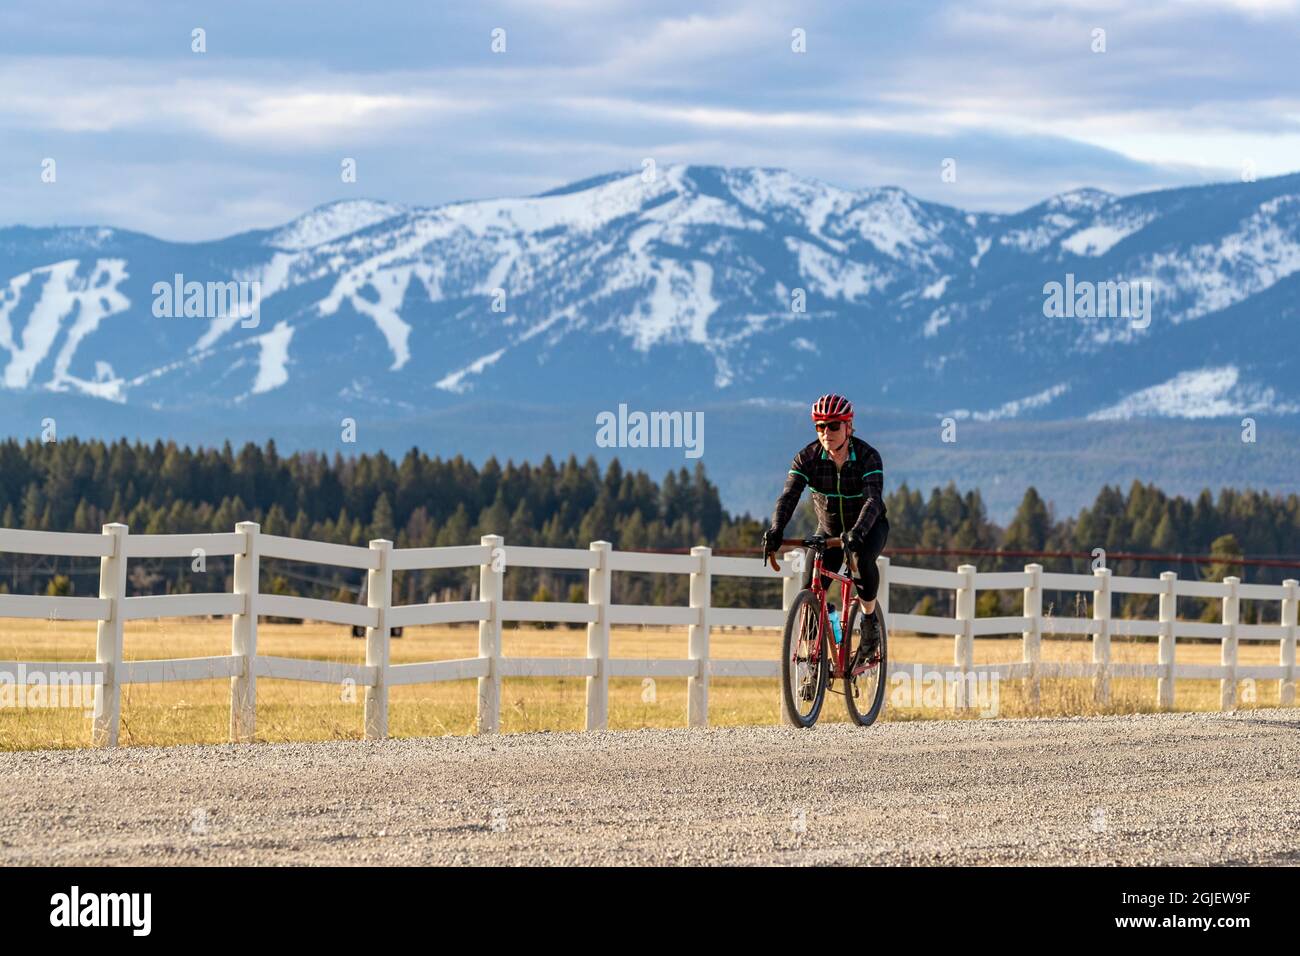 Bicycling on gravel roads of the Flathead Valley, Montana USA. (MR) Stock Photo